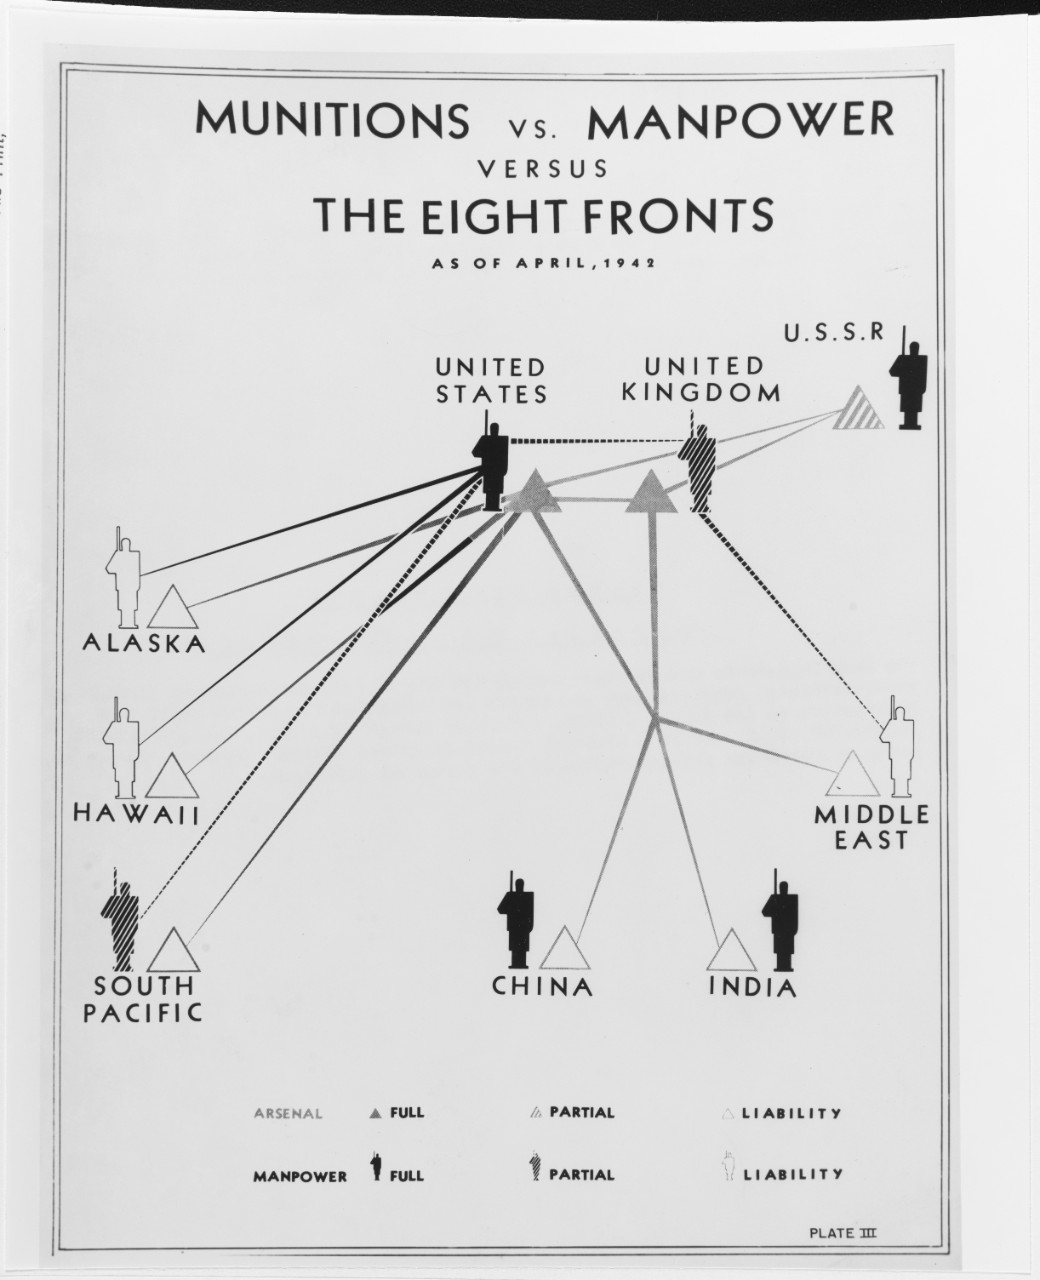 "Munitions vs. manpower, versus the eight fronts as of April 1942"